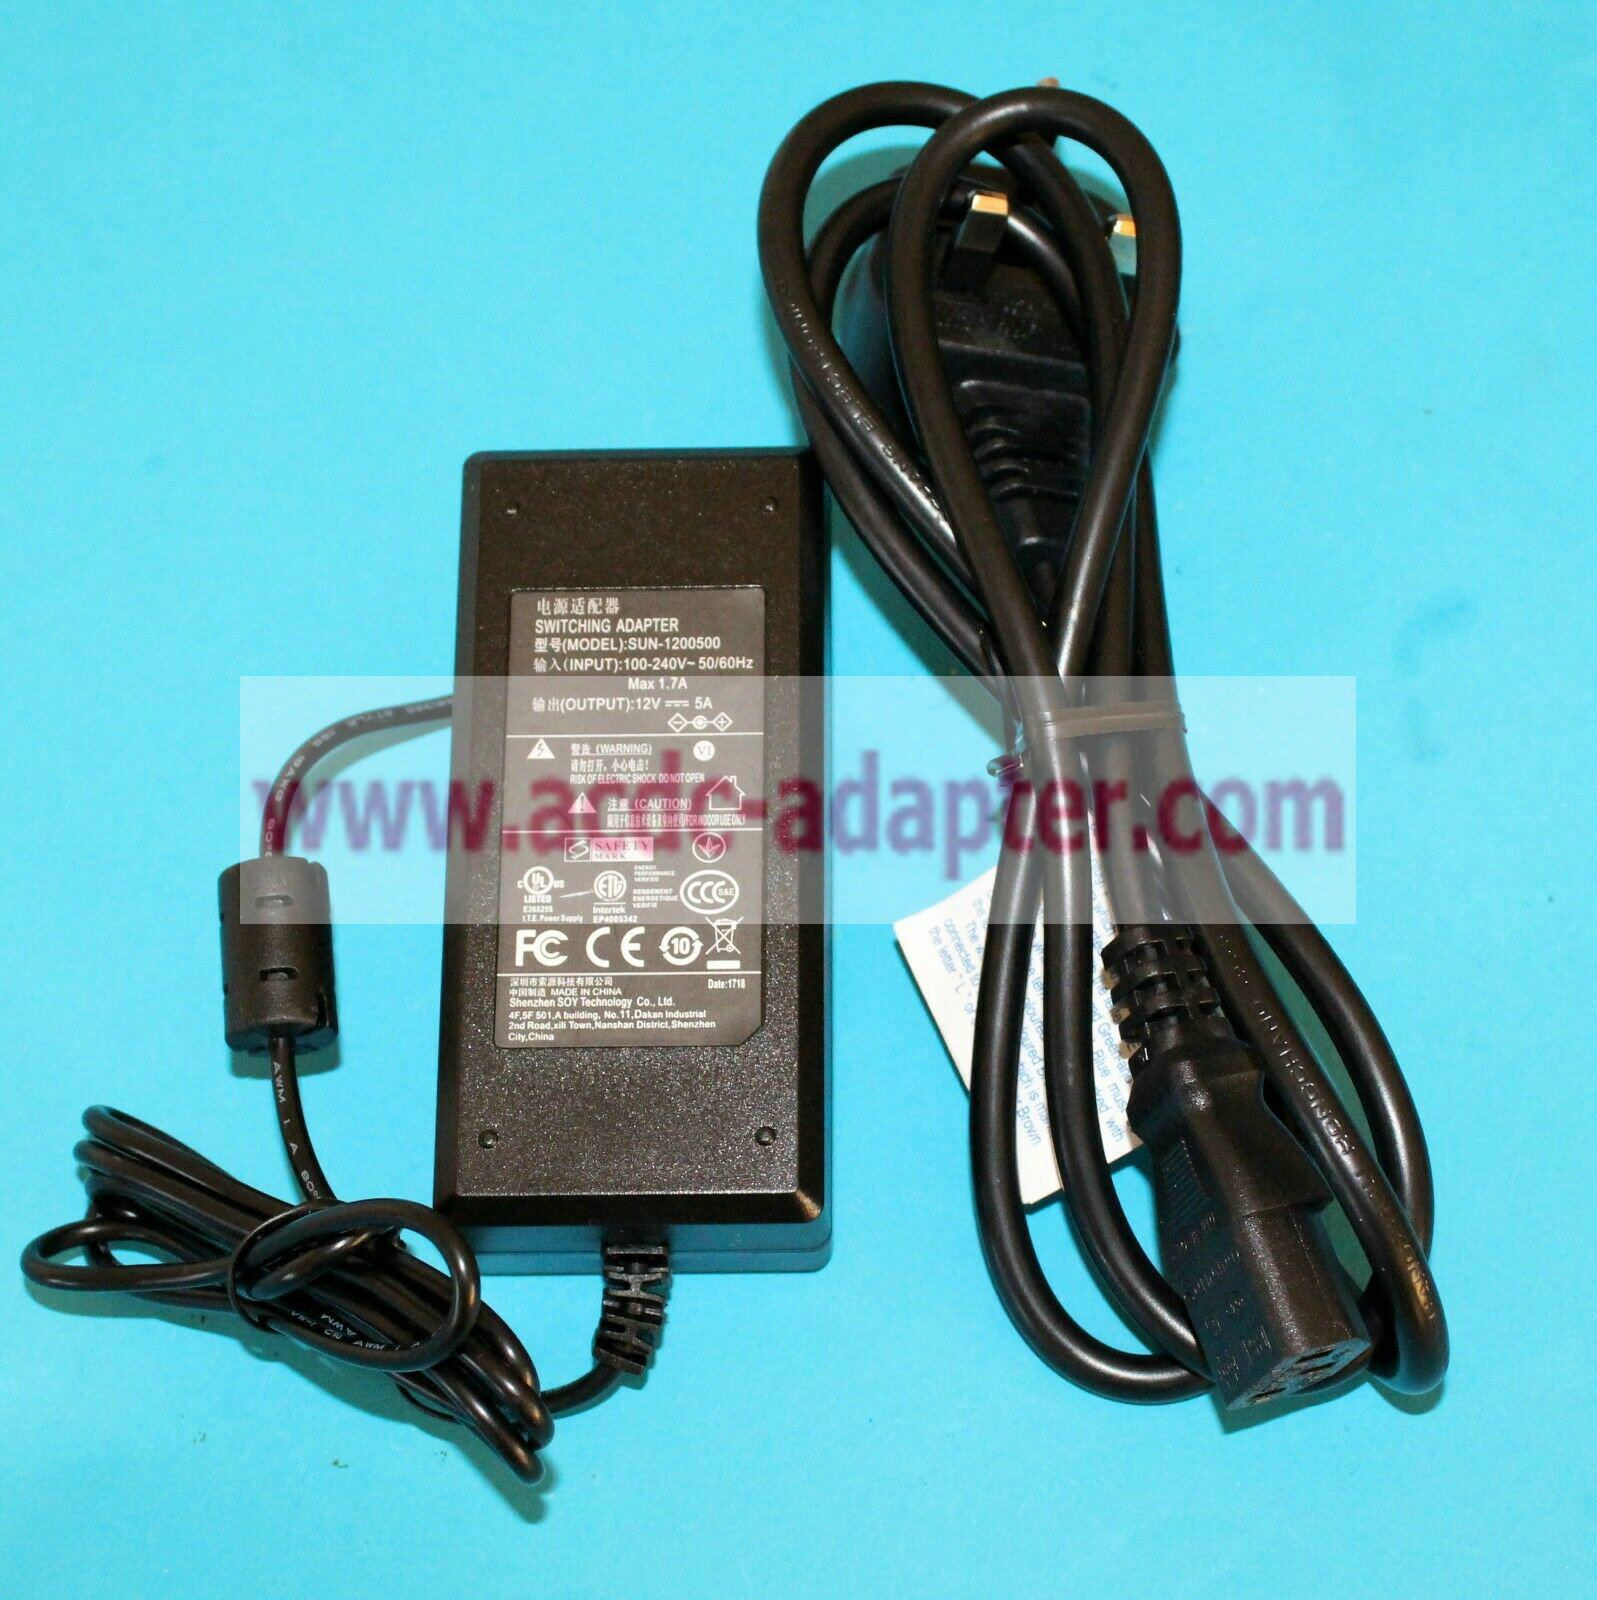 New SUN-1200500 12V 5A SWITCHING ADAPTER POWER SUPPLY - Click Image to Close